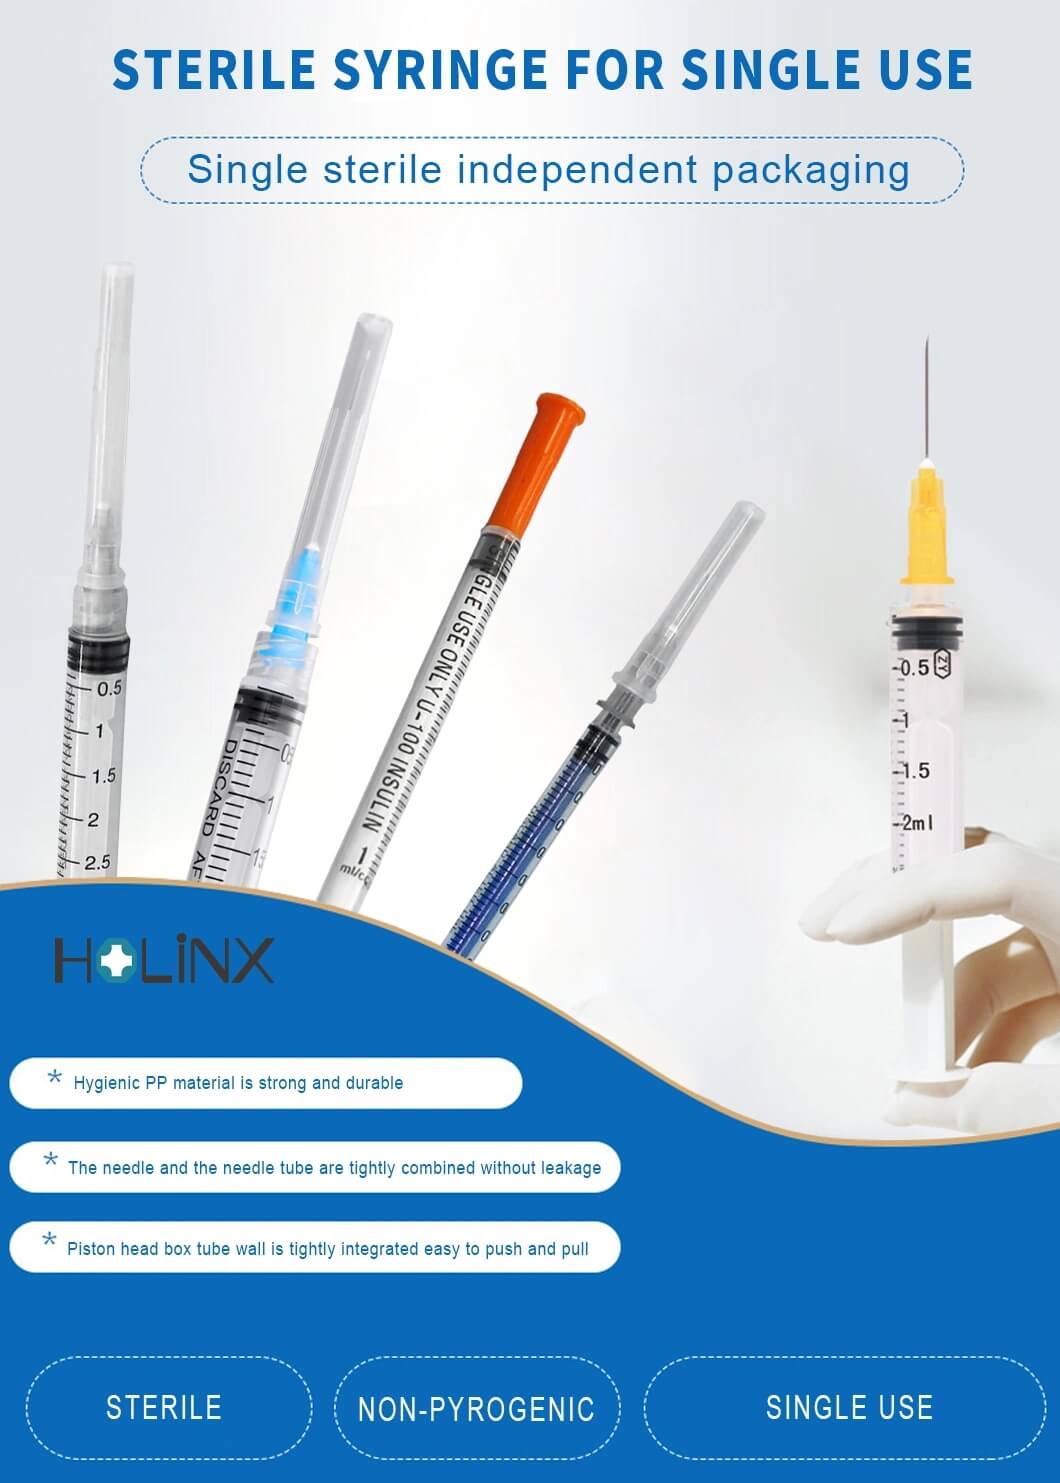 Steroid Irrigation Insulin Disposable Safety Plastic Medical Oral Syringe, Single Use Only 5ml Safety Plastic Medical Oral Syringe